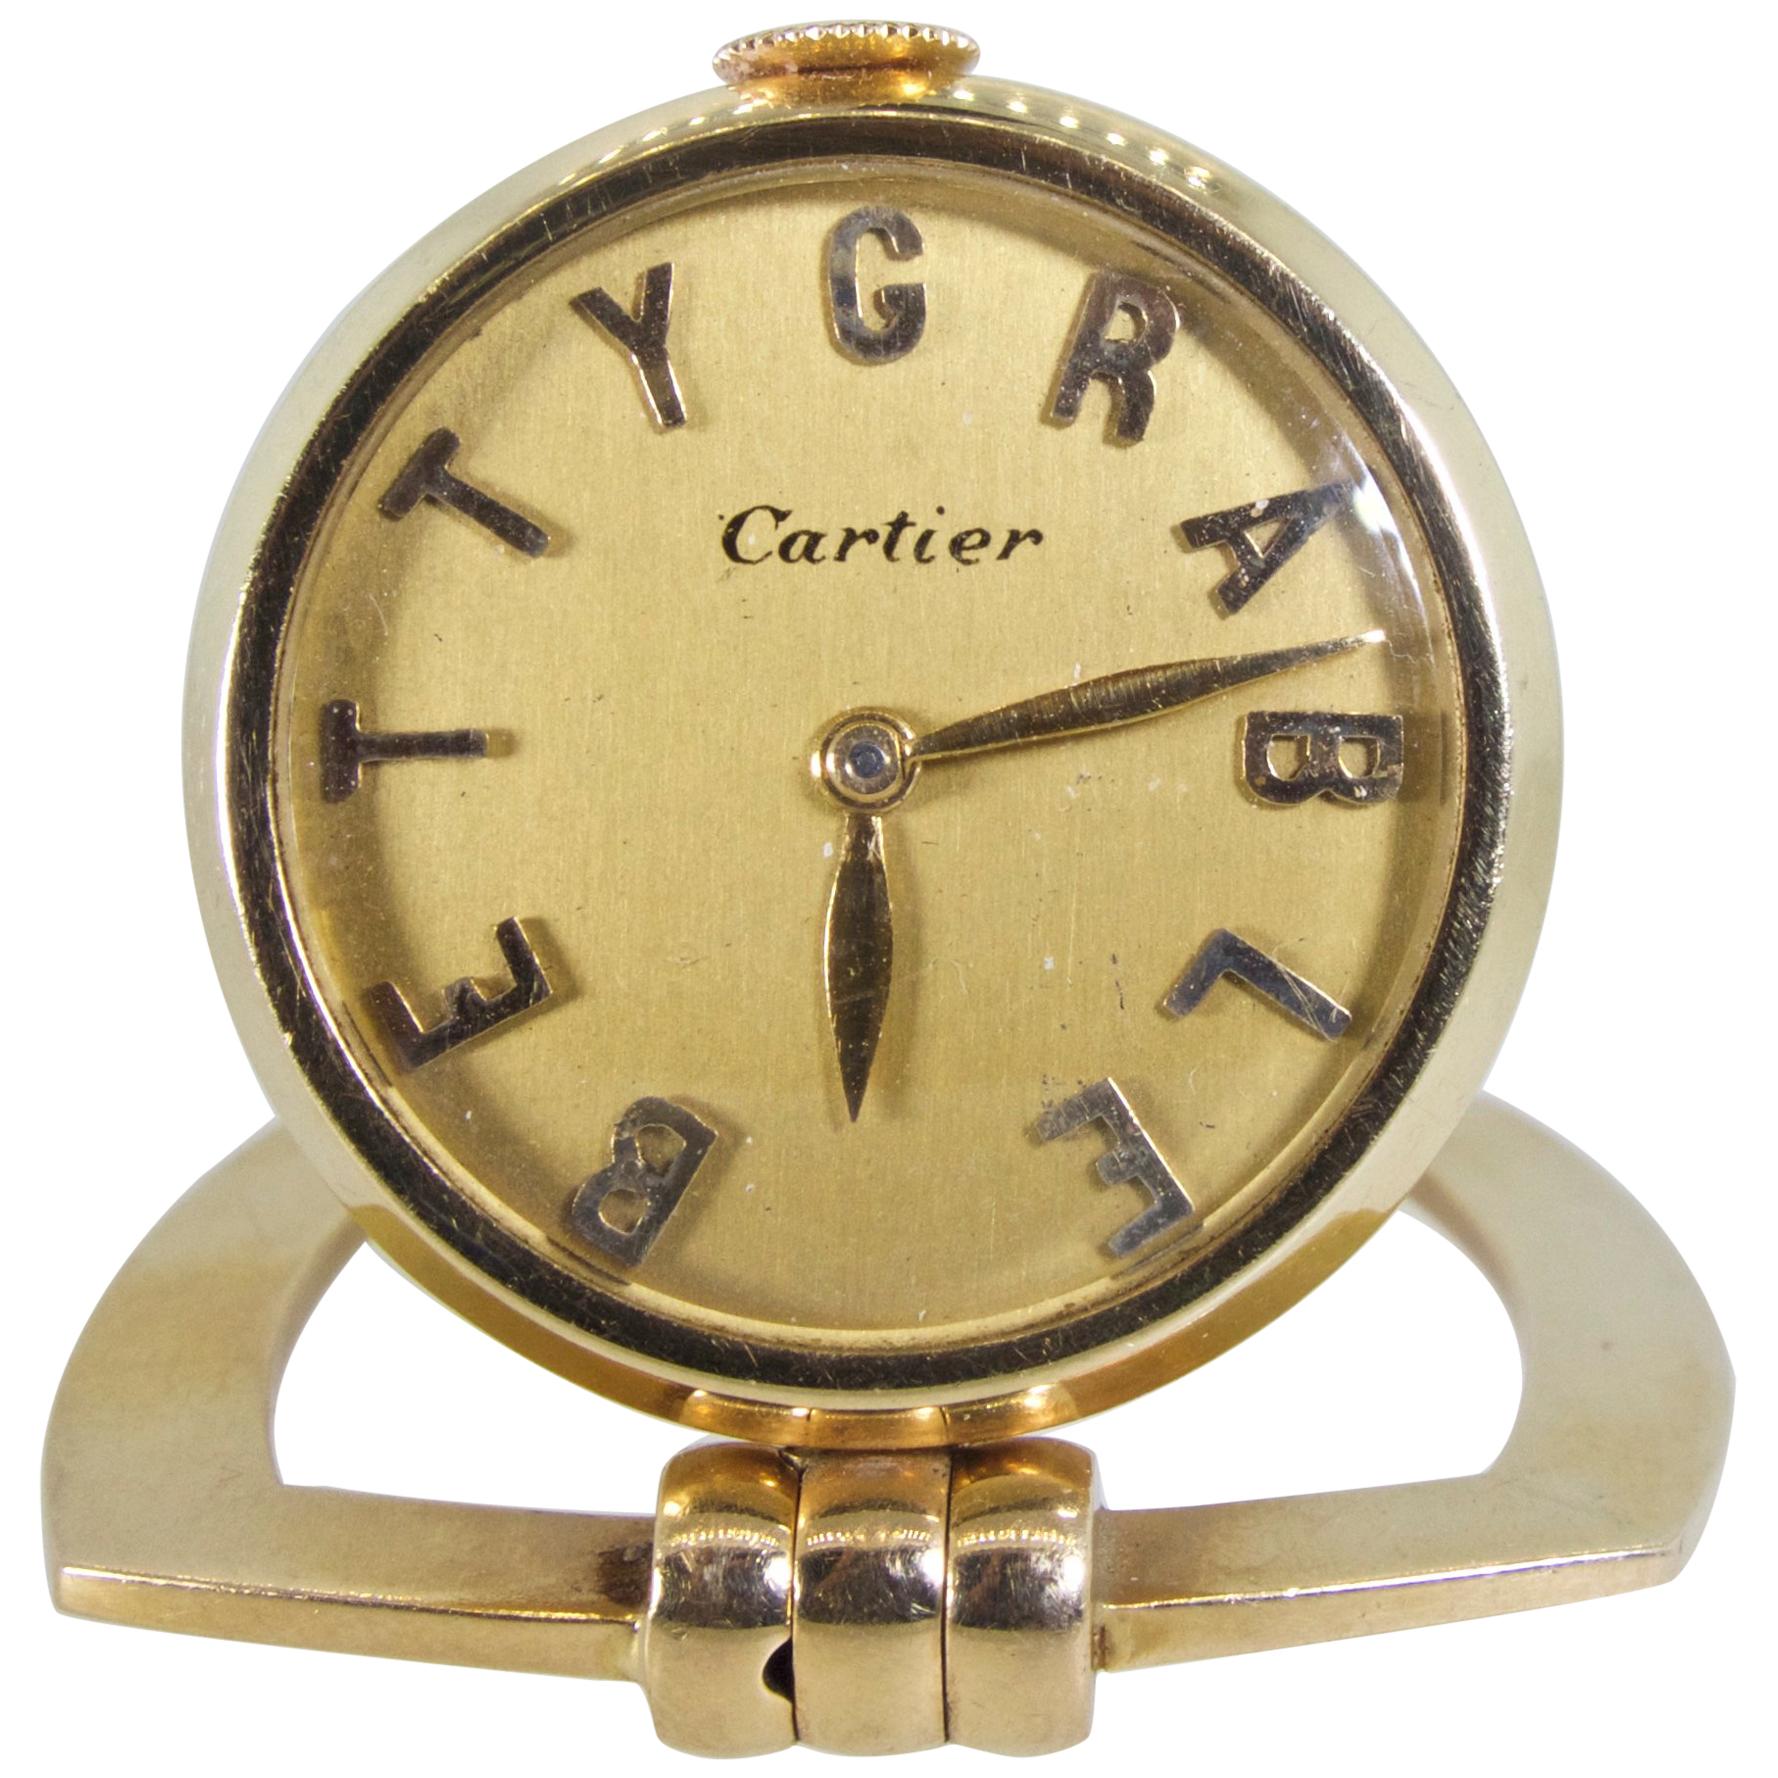 Cartier Watch with Betty Grable as Chapters, circa 1955